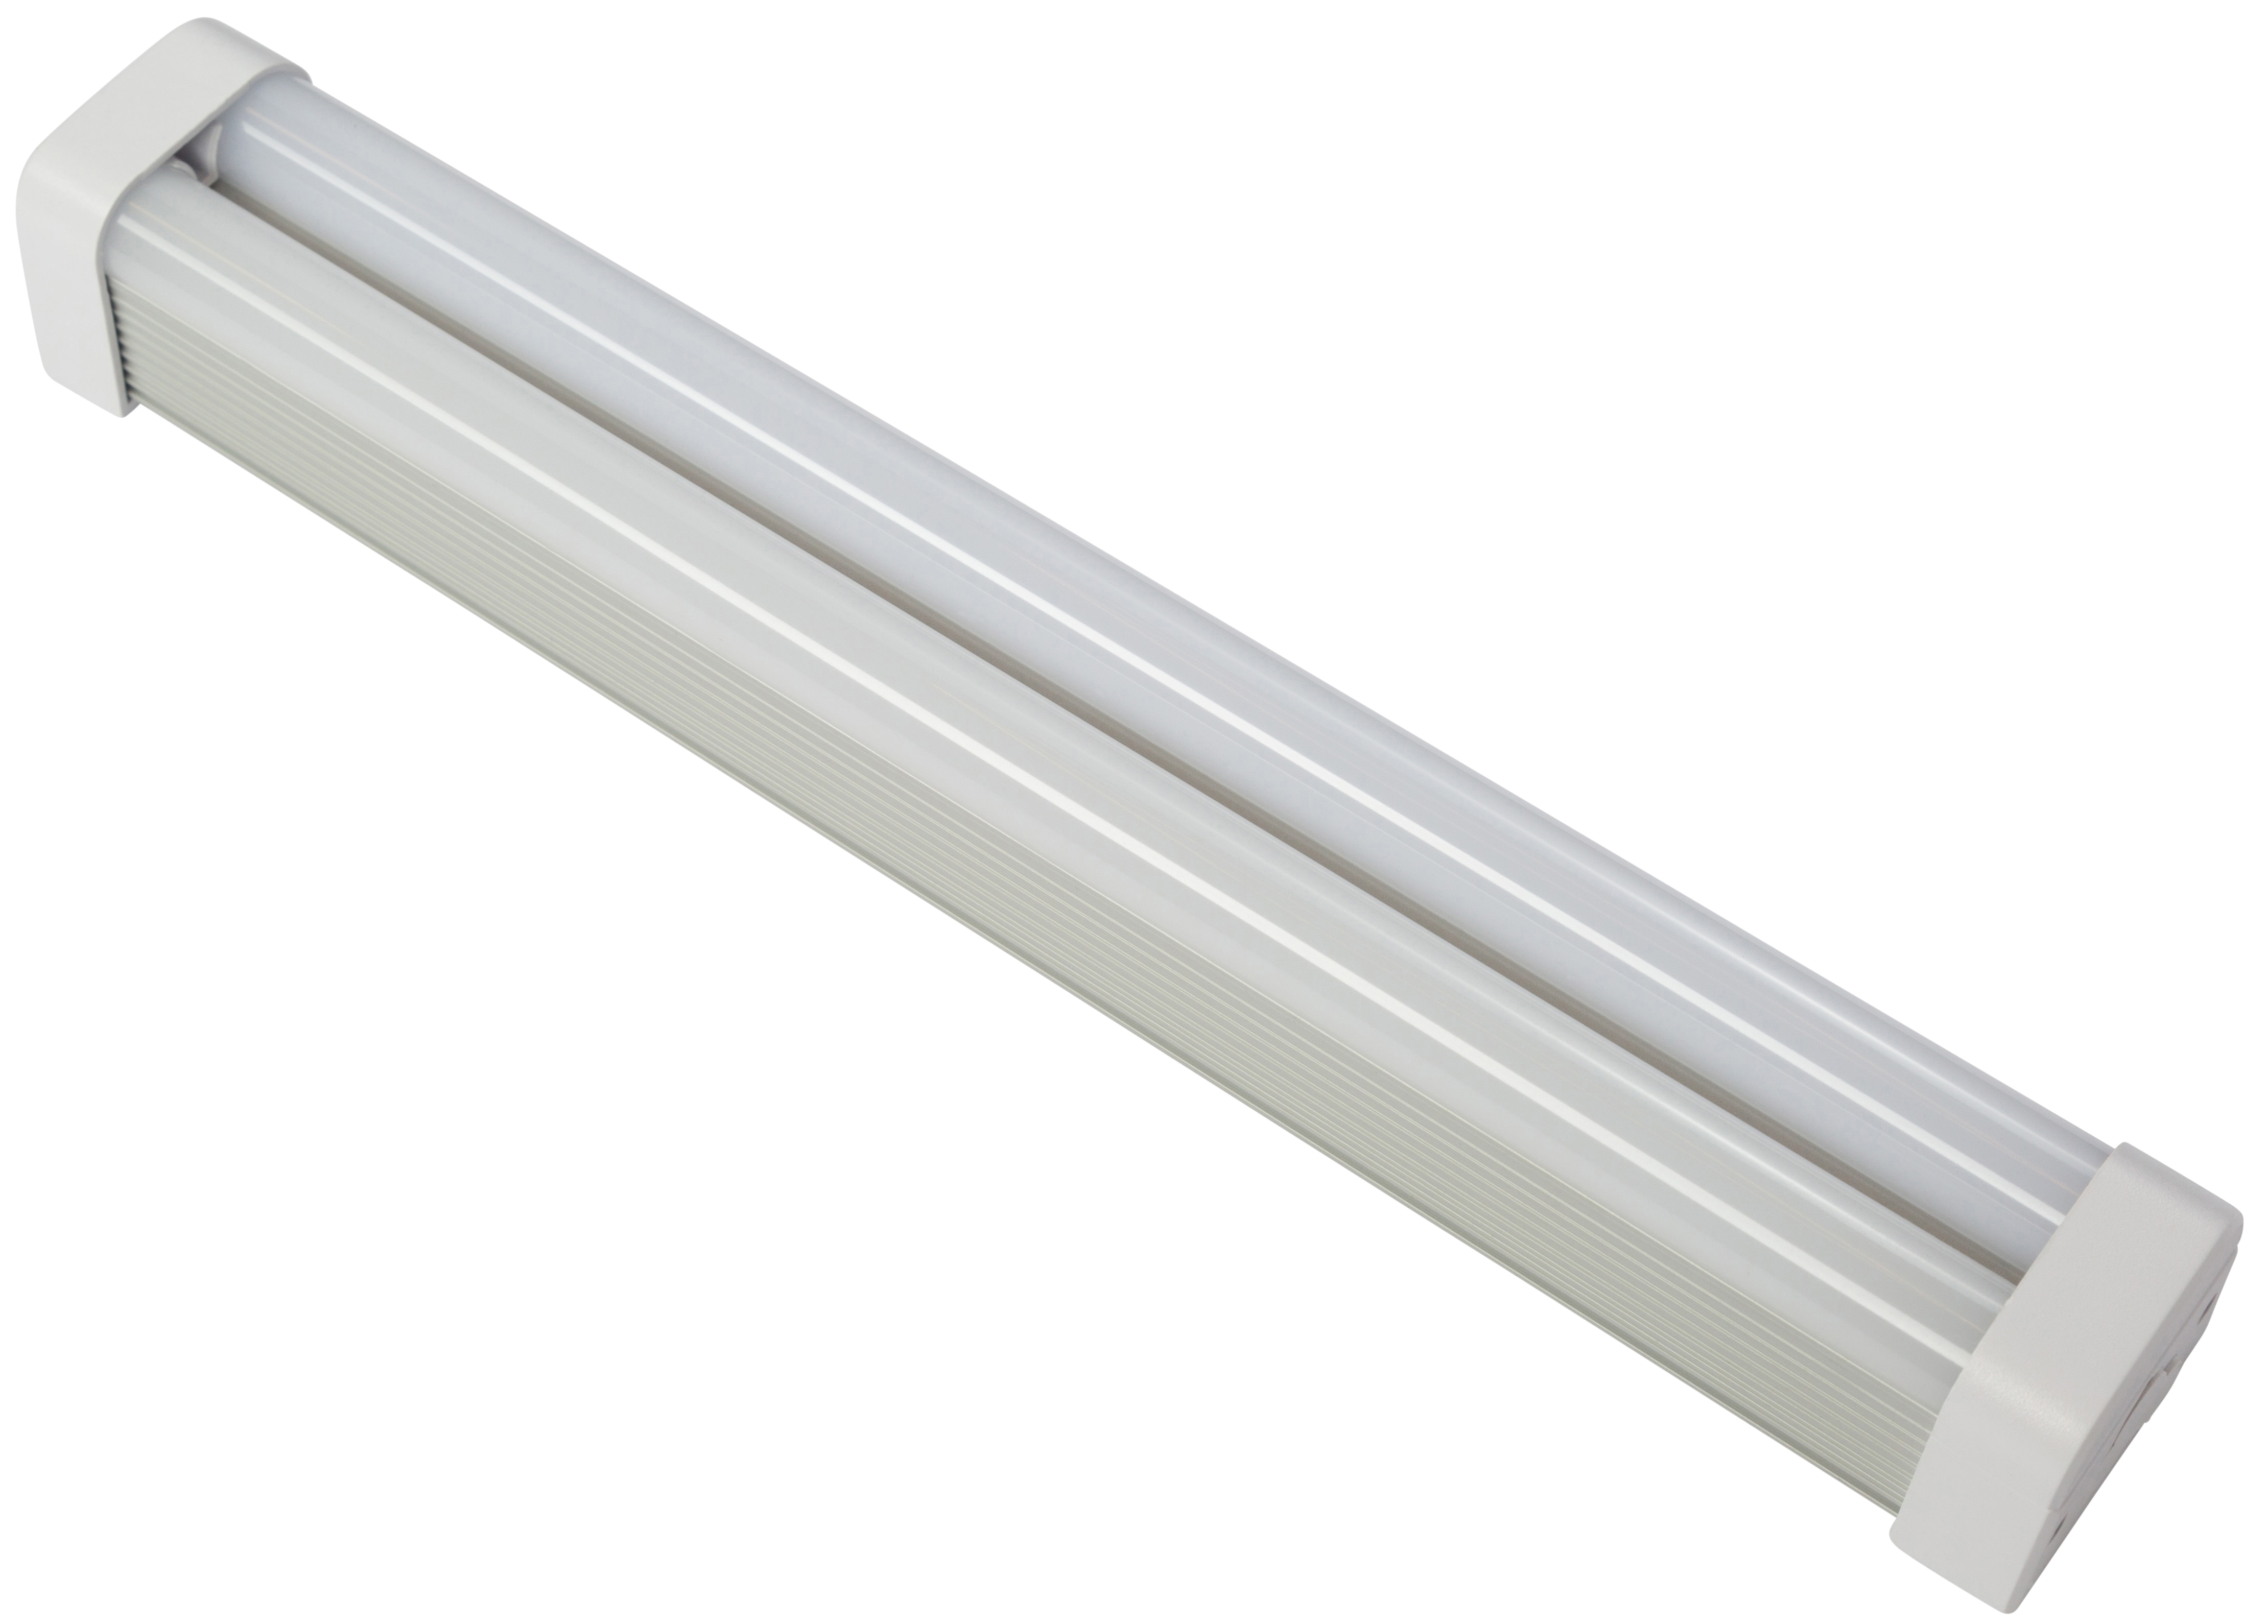 T5 Double Tube, 4FT, 30W, 4K,
Frosted